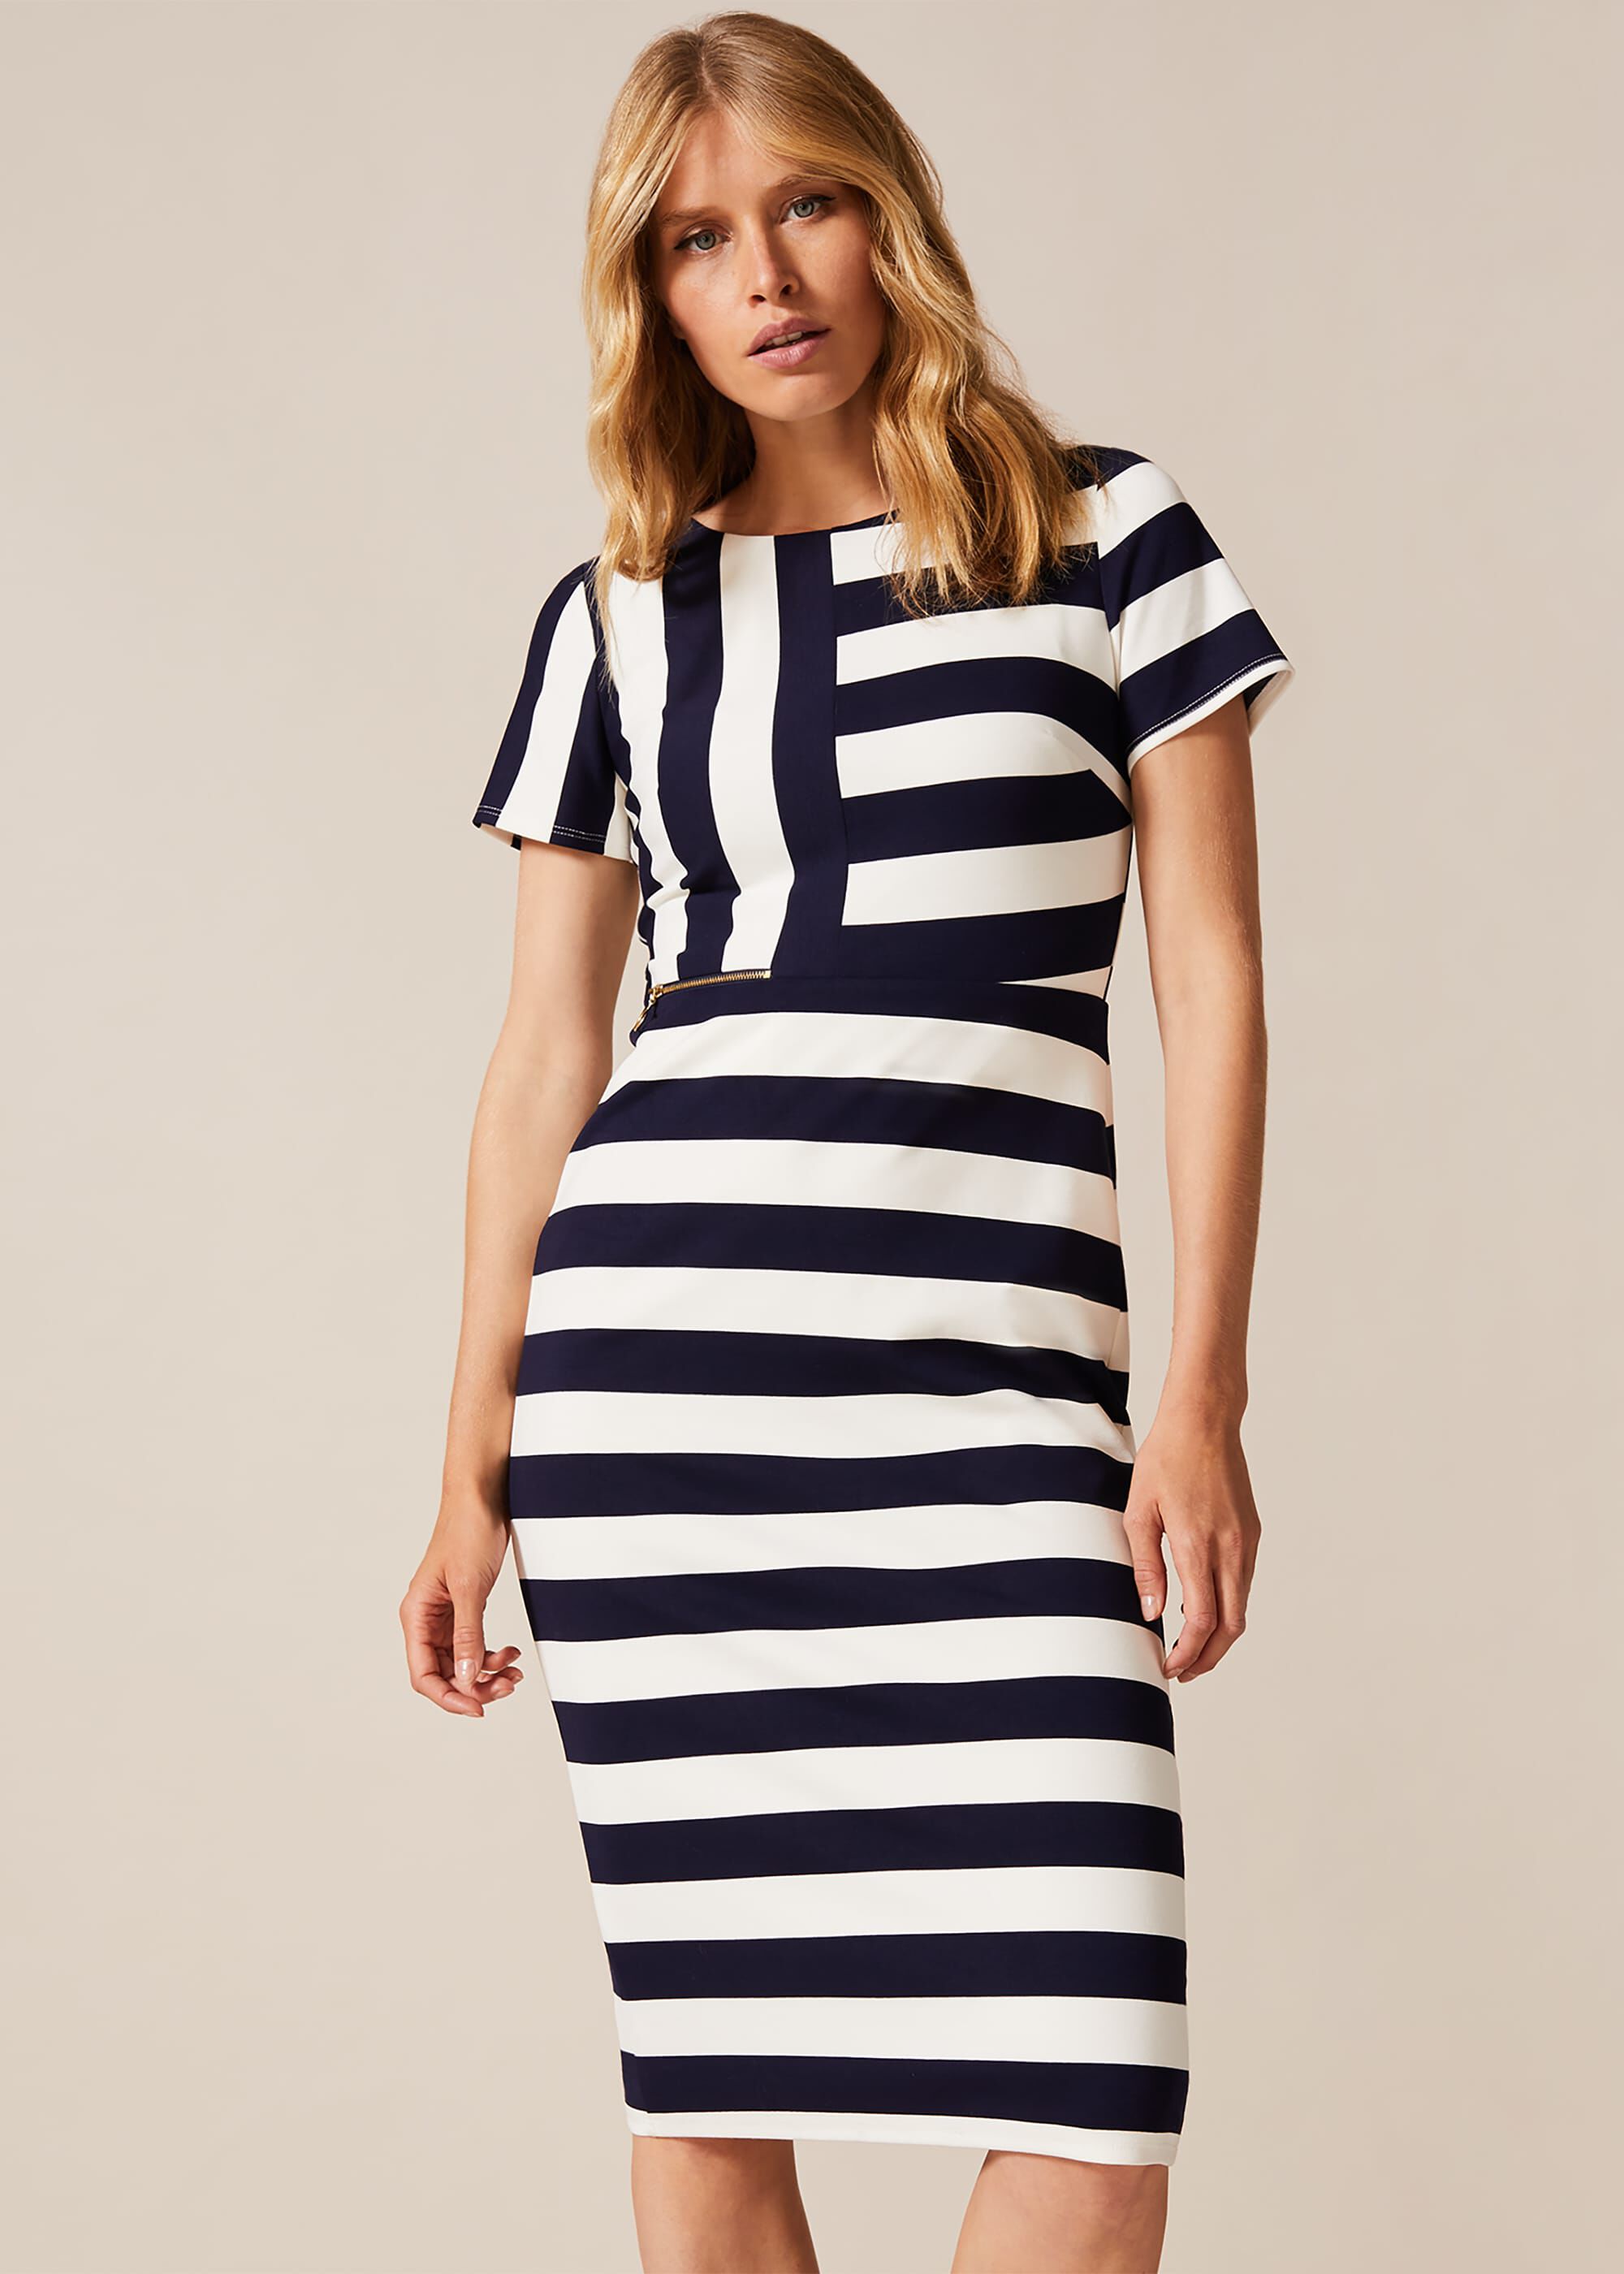 Smart Dresses For Work | Phase Eight | Phase Eight